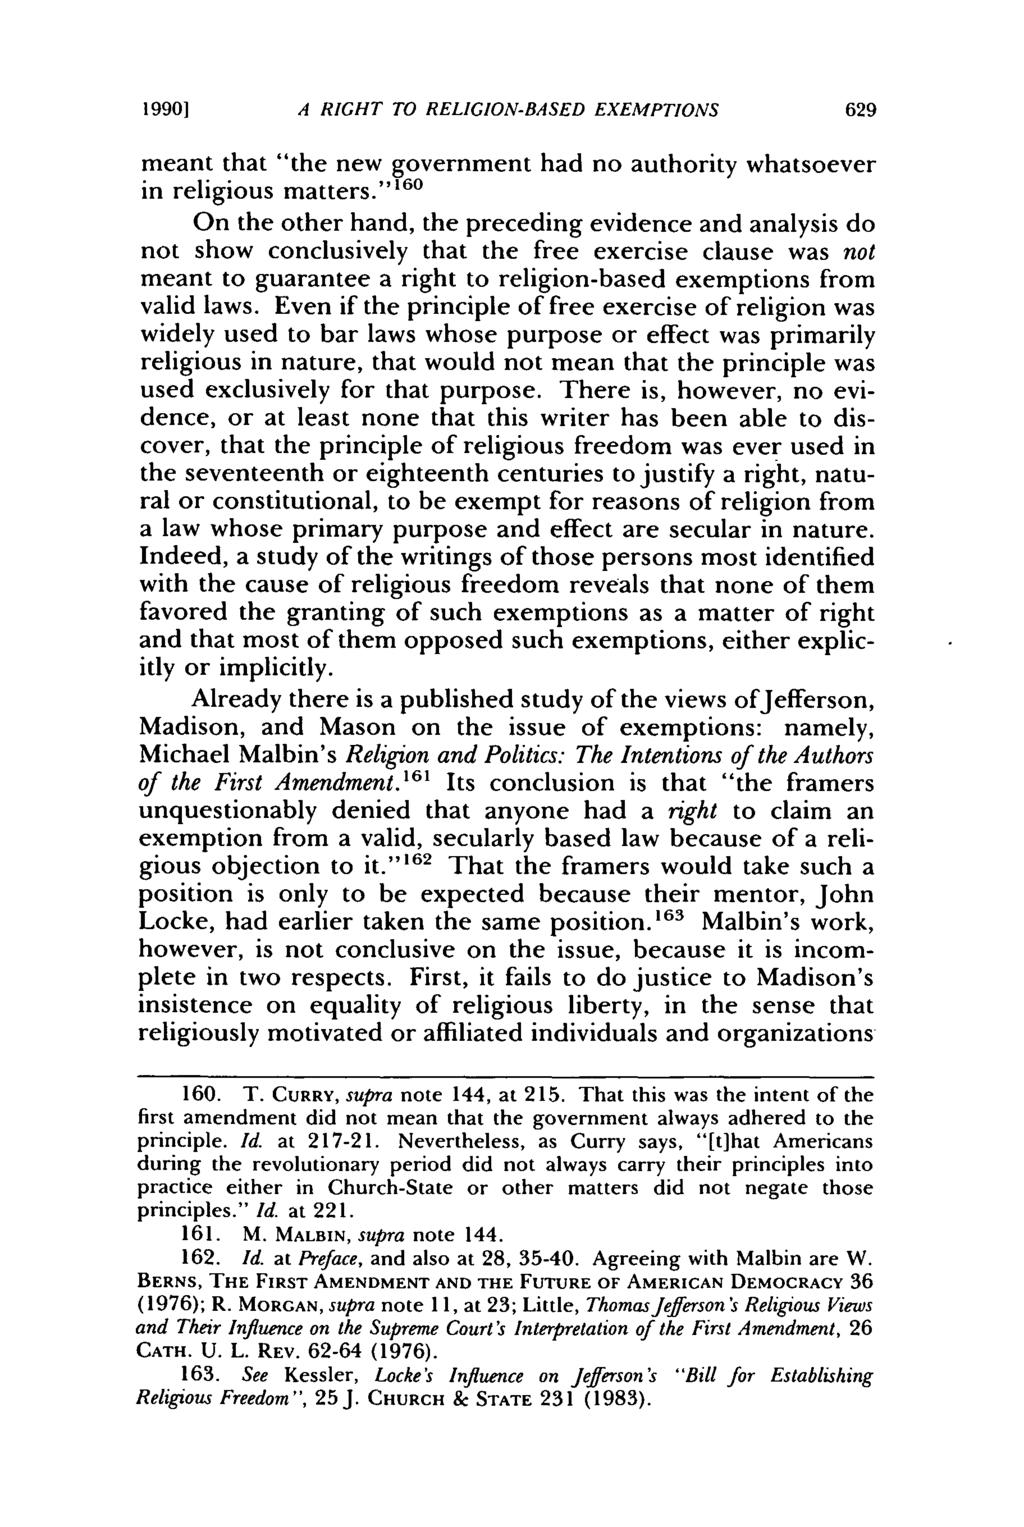 1990] A RIGHT TO RELIGION-BASED EXEMPTIONS meant that "the new government had no authority whatsoever in religious matters.